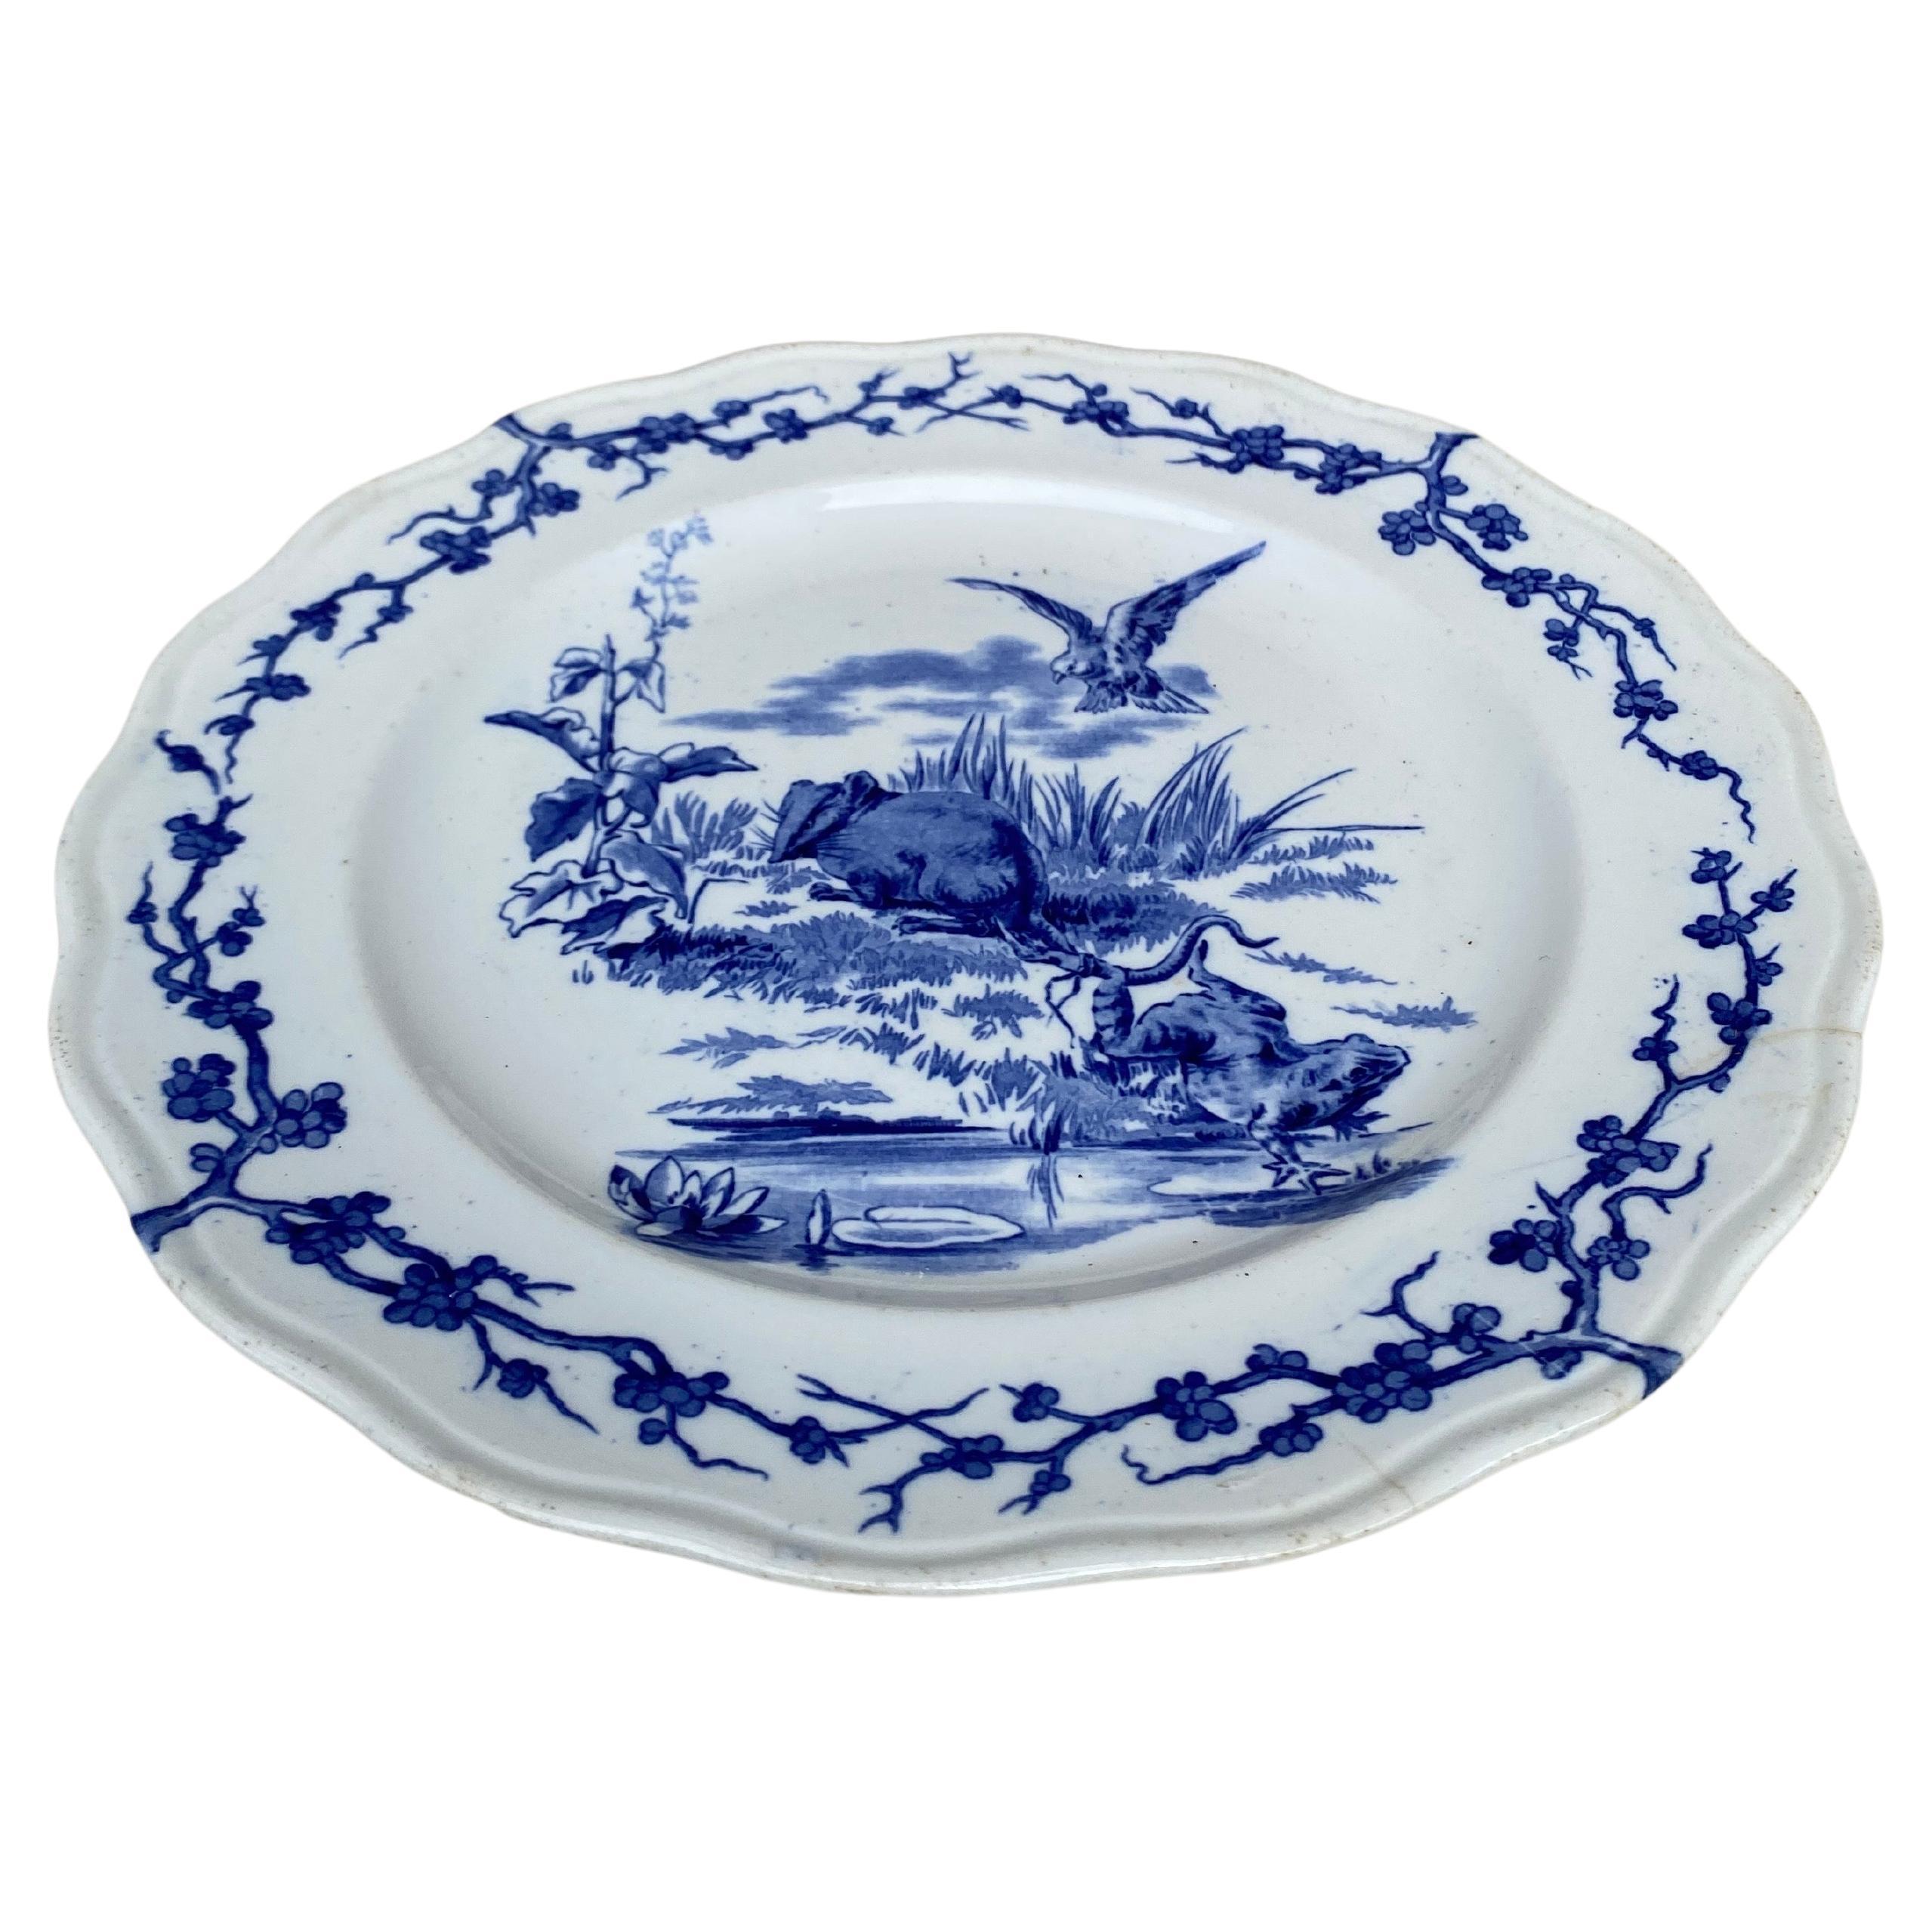 English blue & white plate eagle & frog brown Westhead and Moore, circa 1890.
Was sold in the Grand Depot 21 rue Drouot Paris.
Fontaine / Aesops Fables
English Losange mark.